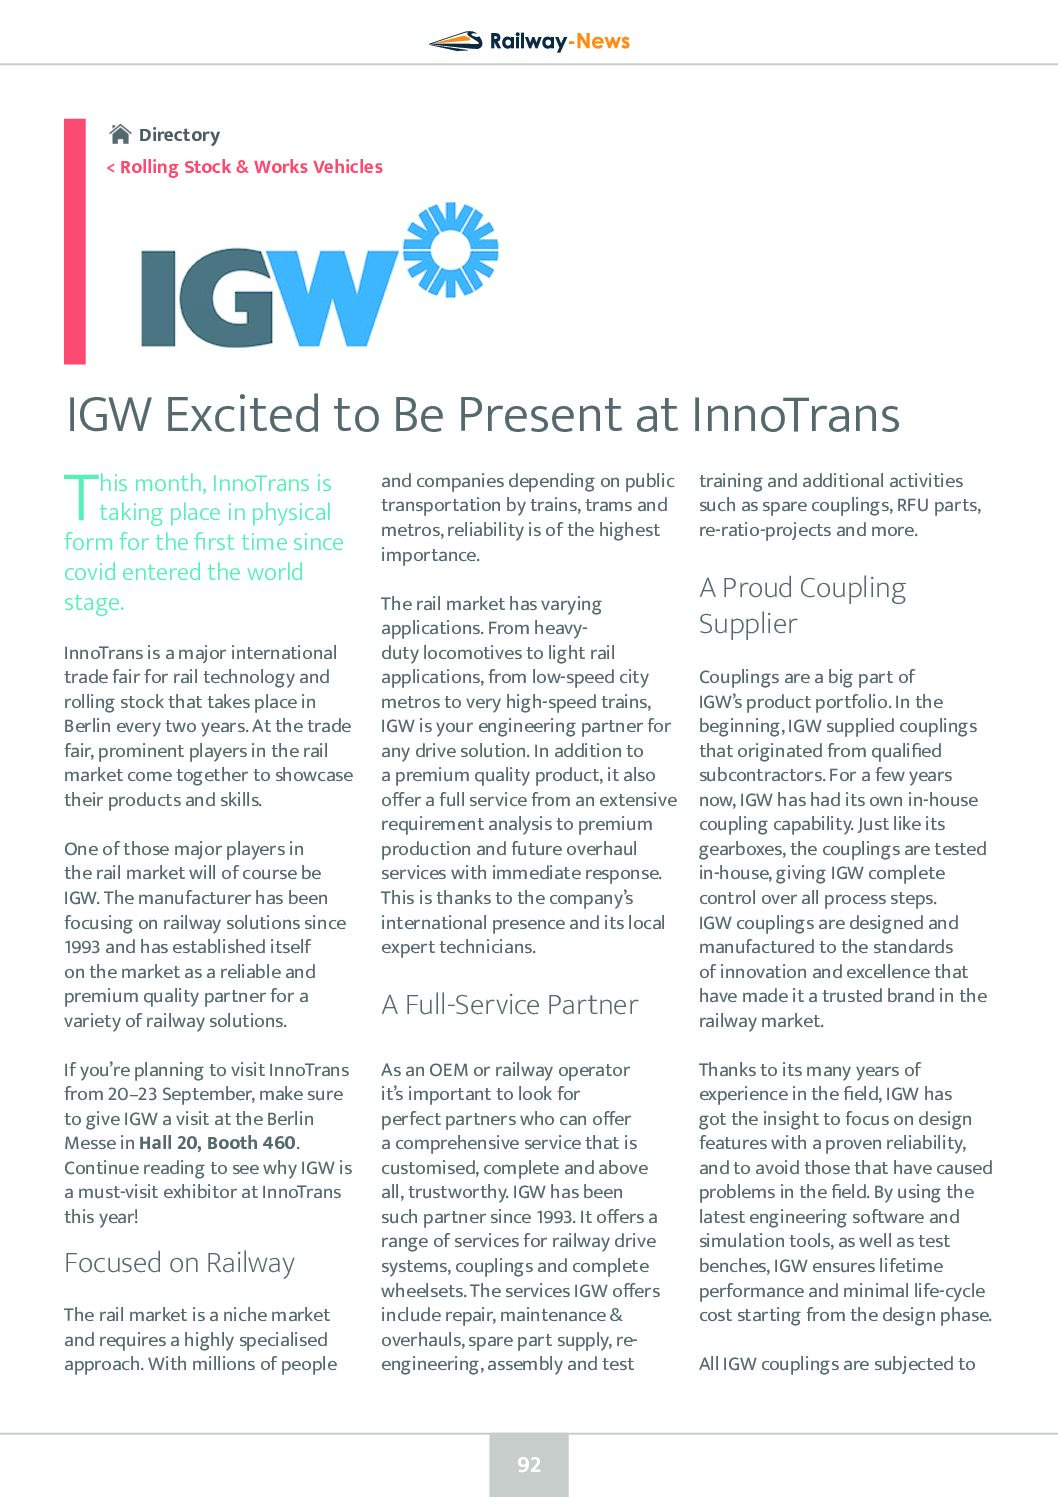 IGW: Excited to Be Present at InnoTrans